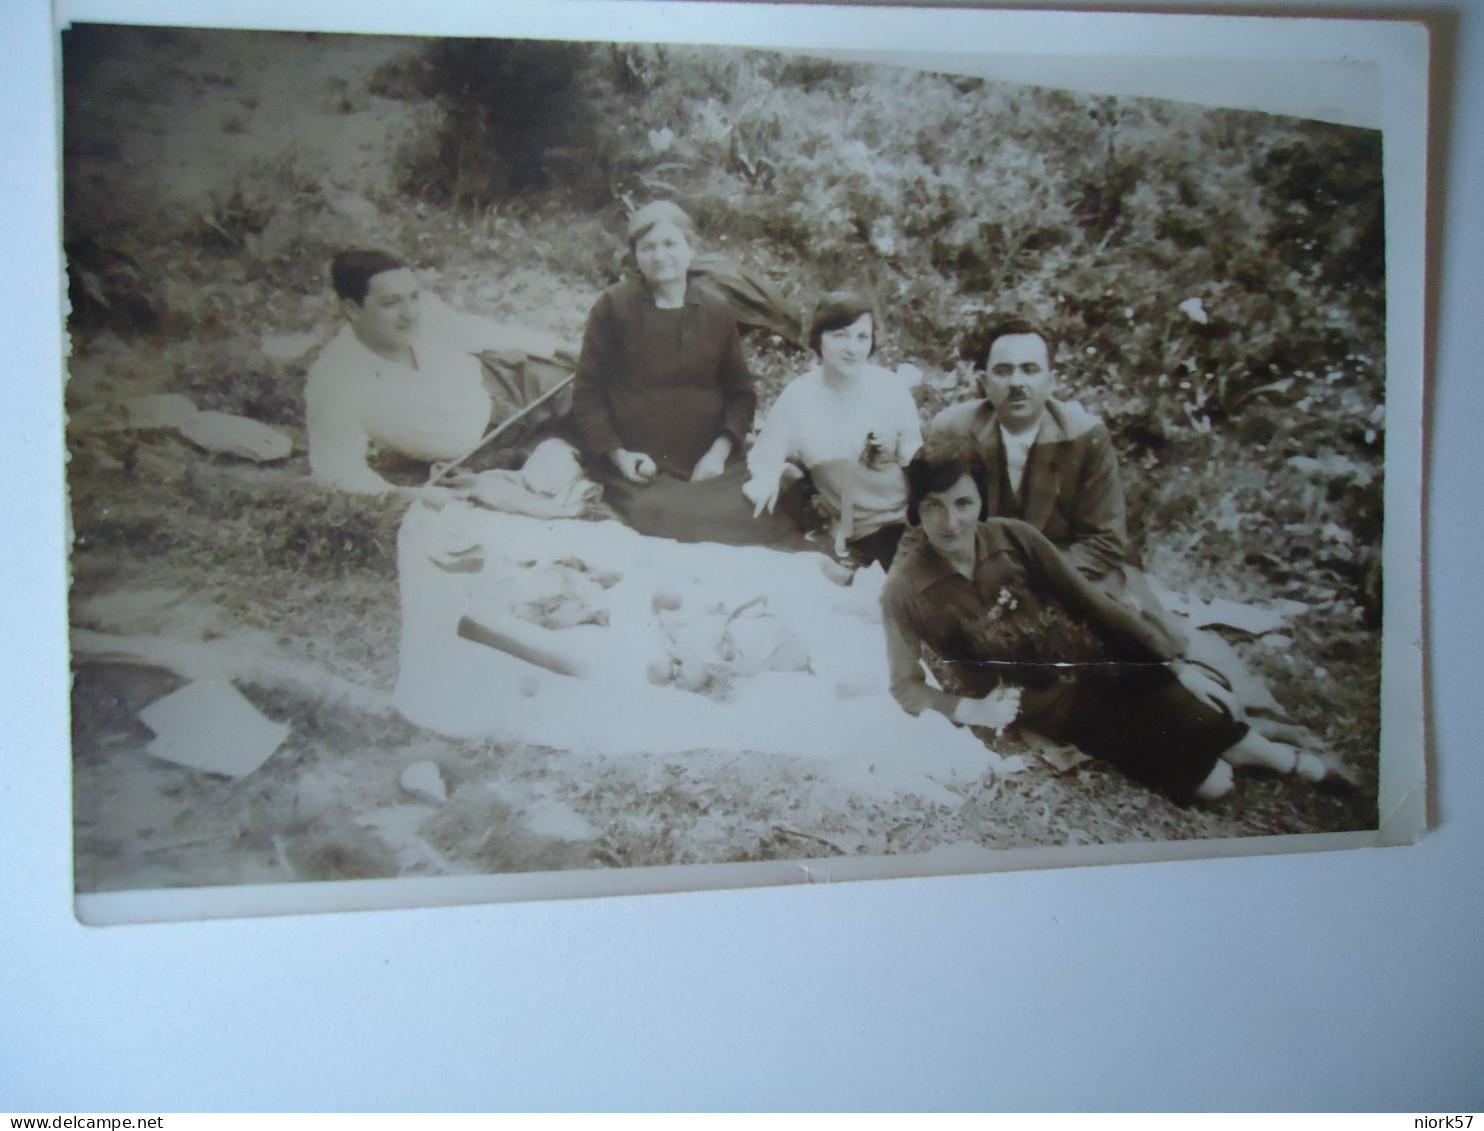 GREECE  PHOTO  POSTCARDS  1929 ΚΑΙΣΙΑΡΙΑΝΗ  FOR MORE PURCHASES 10% DISCOUNT - Grèce